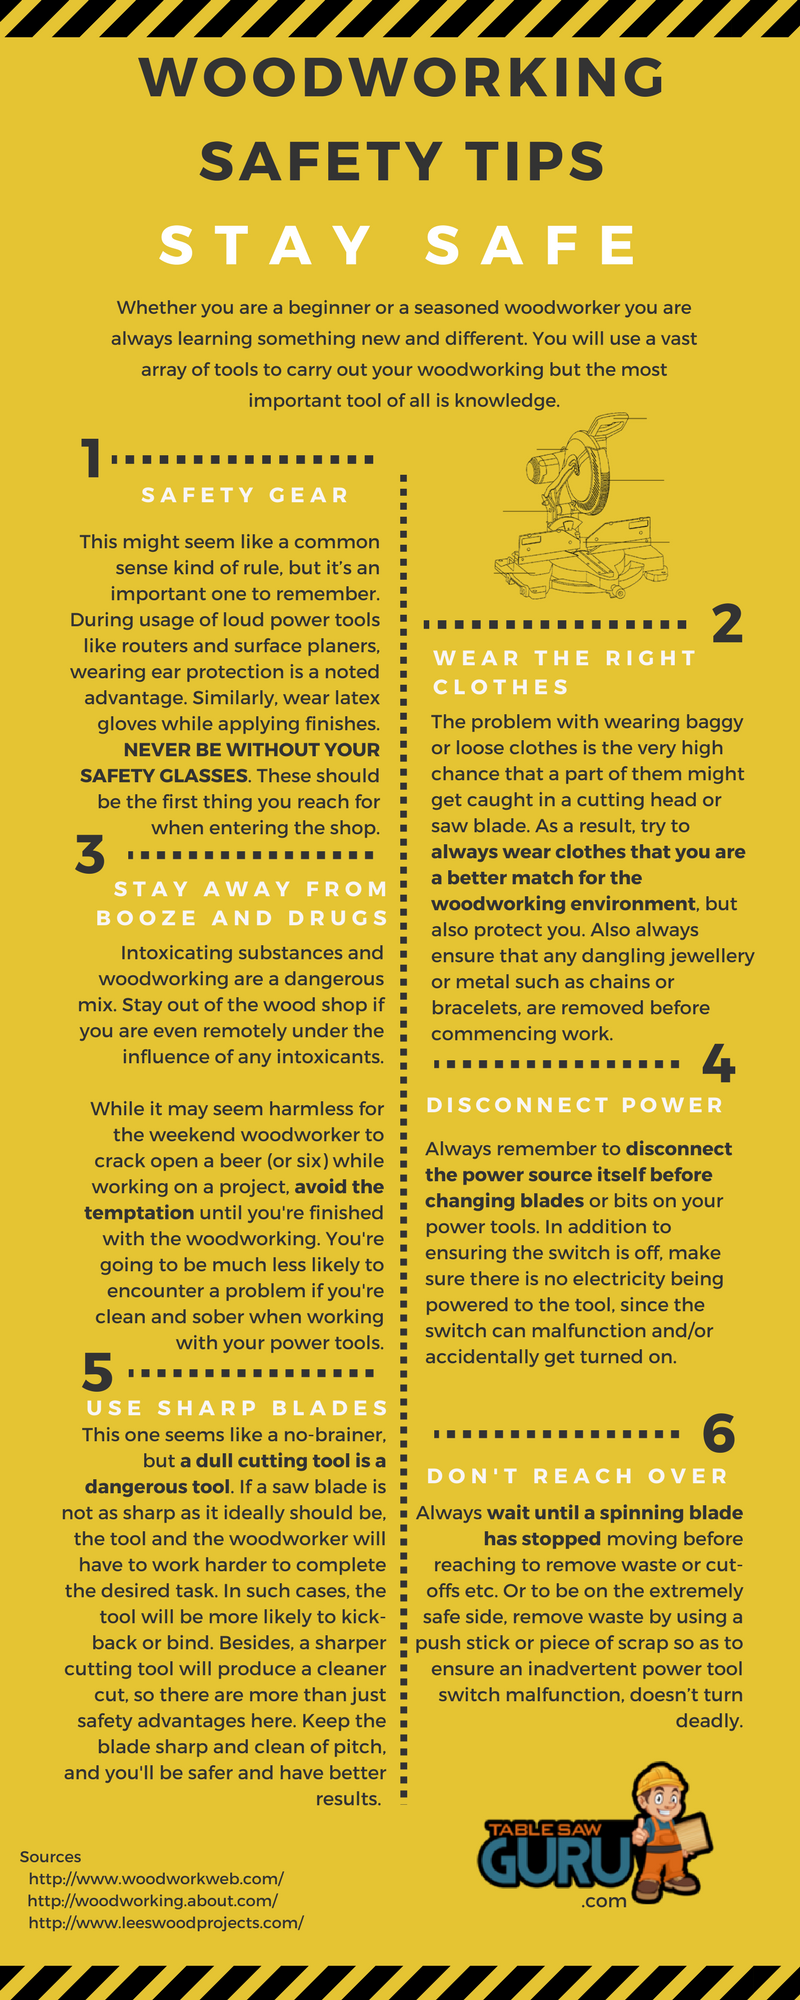 Woodworking safety tips - Infographic - Table Saw Reviews